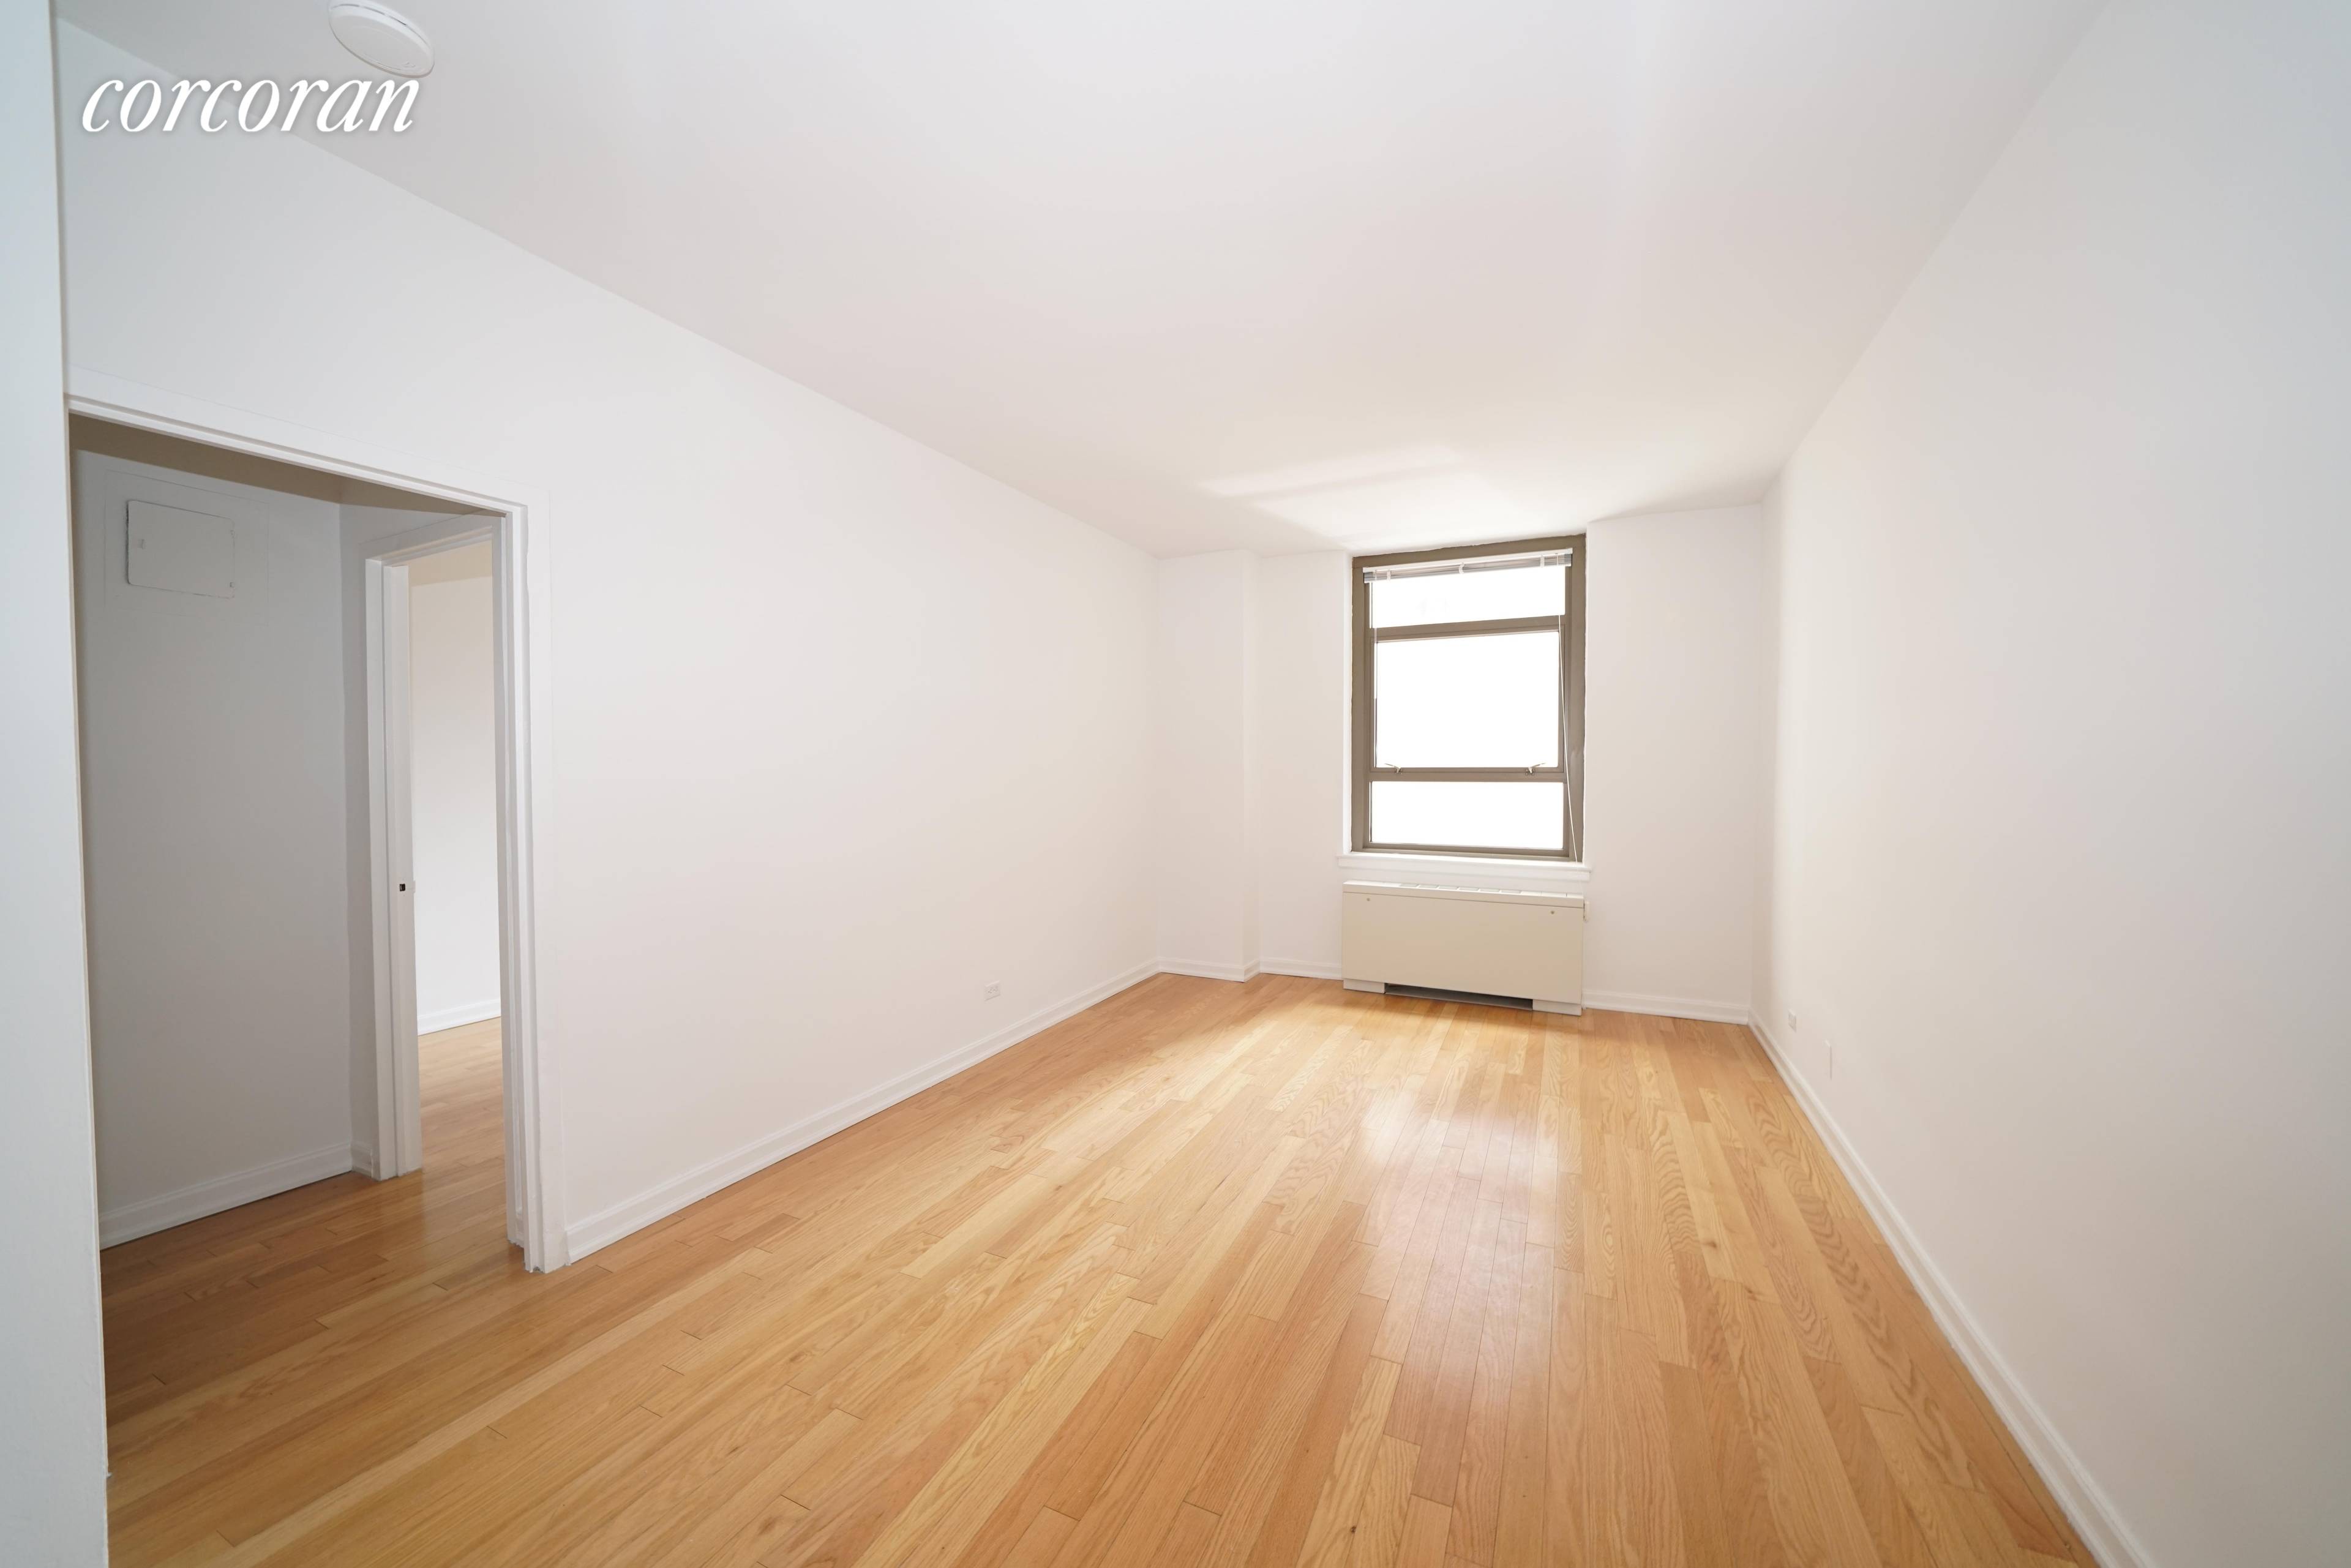 New to the market ! ! ! Spacious renovated 1 bedroom home located in the 30s and Park Ave, in a full time doorman building with easy access to everything.